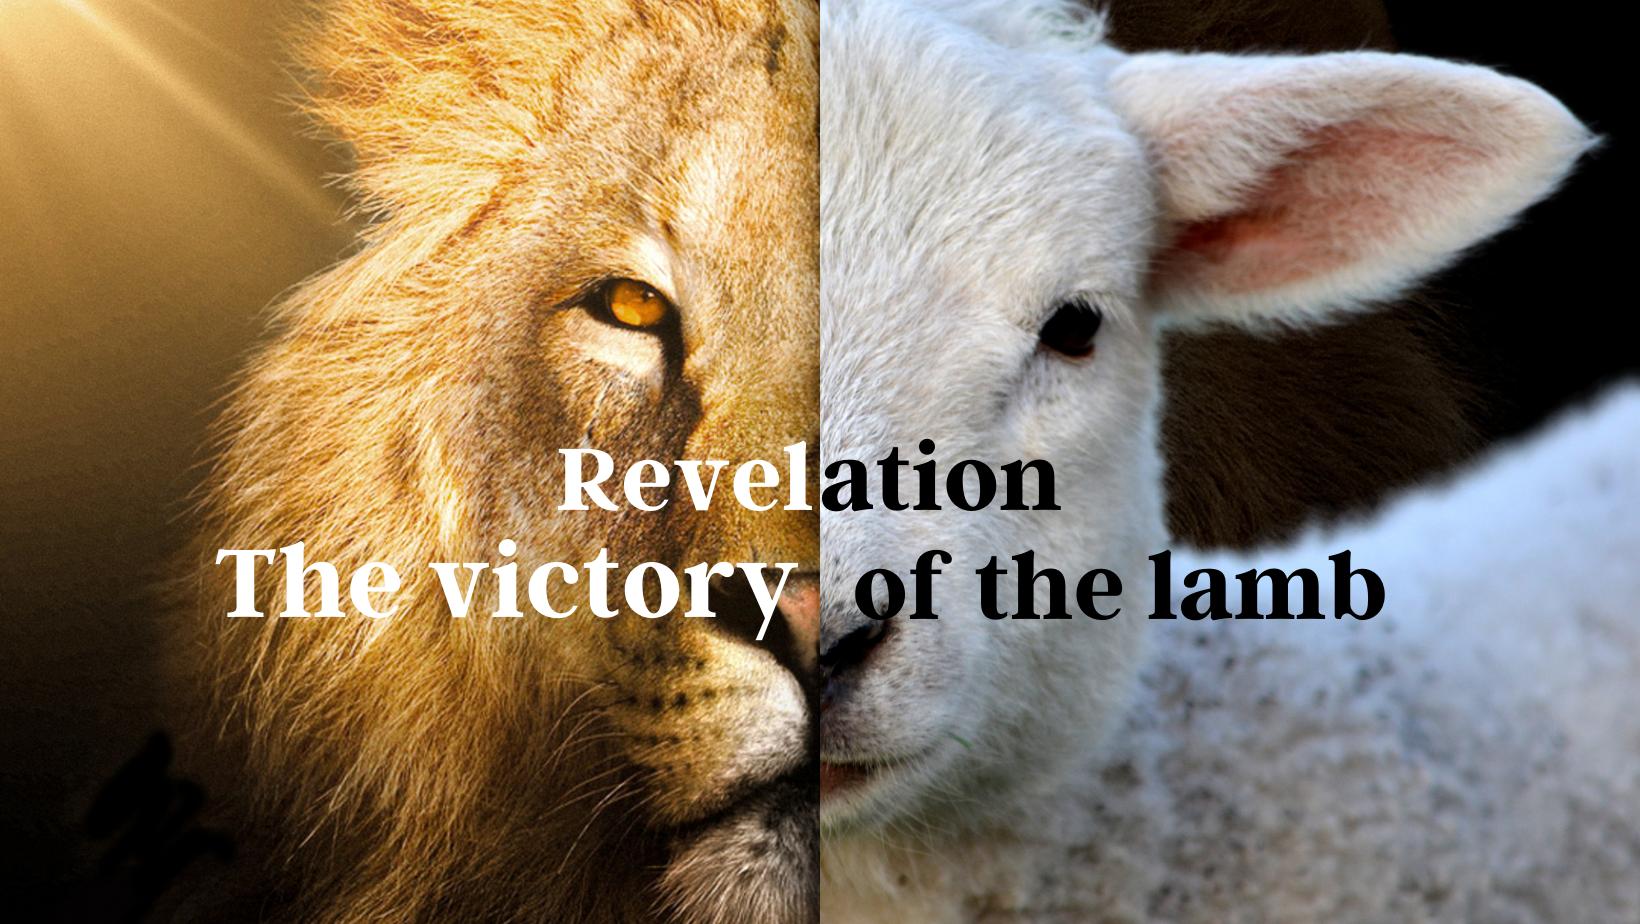 The victory of the lamb